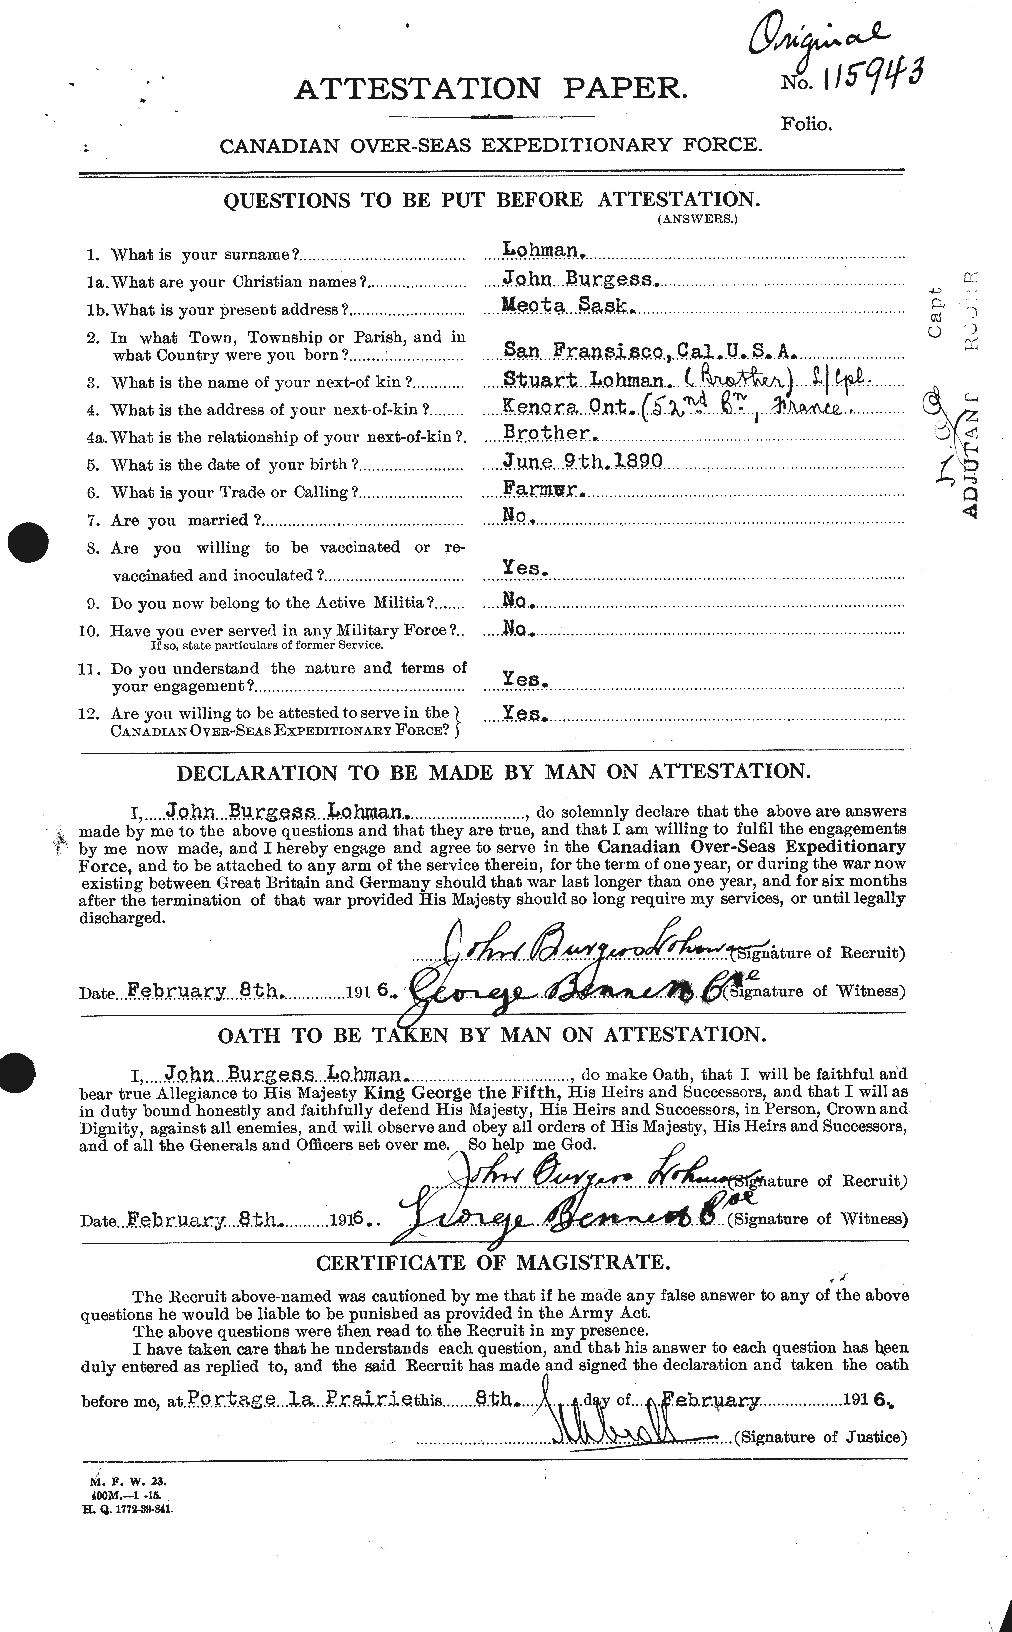 Personnel Records of the First World War - CEF 461926a